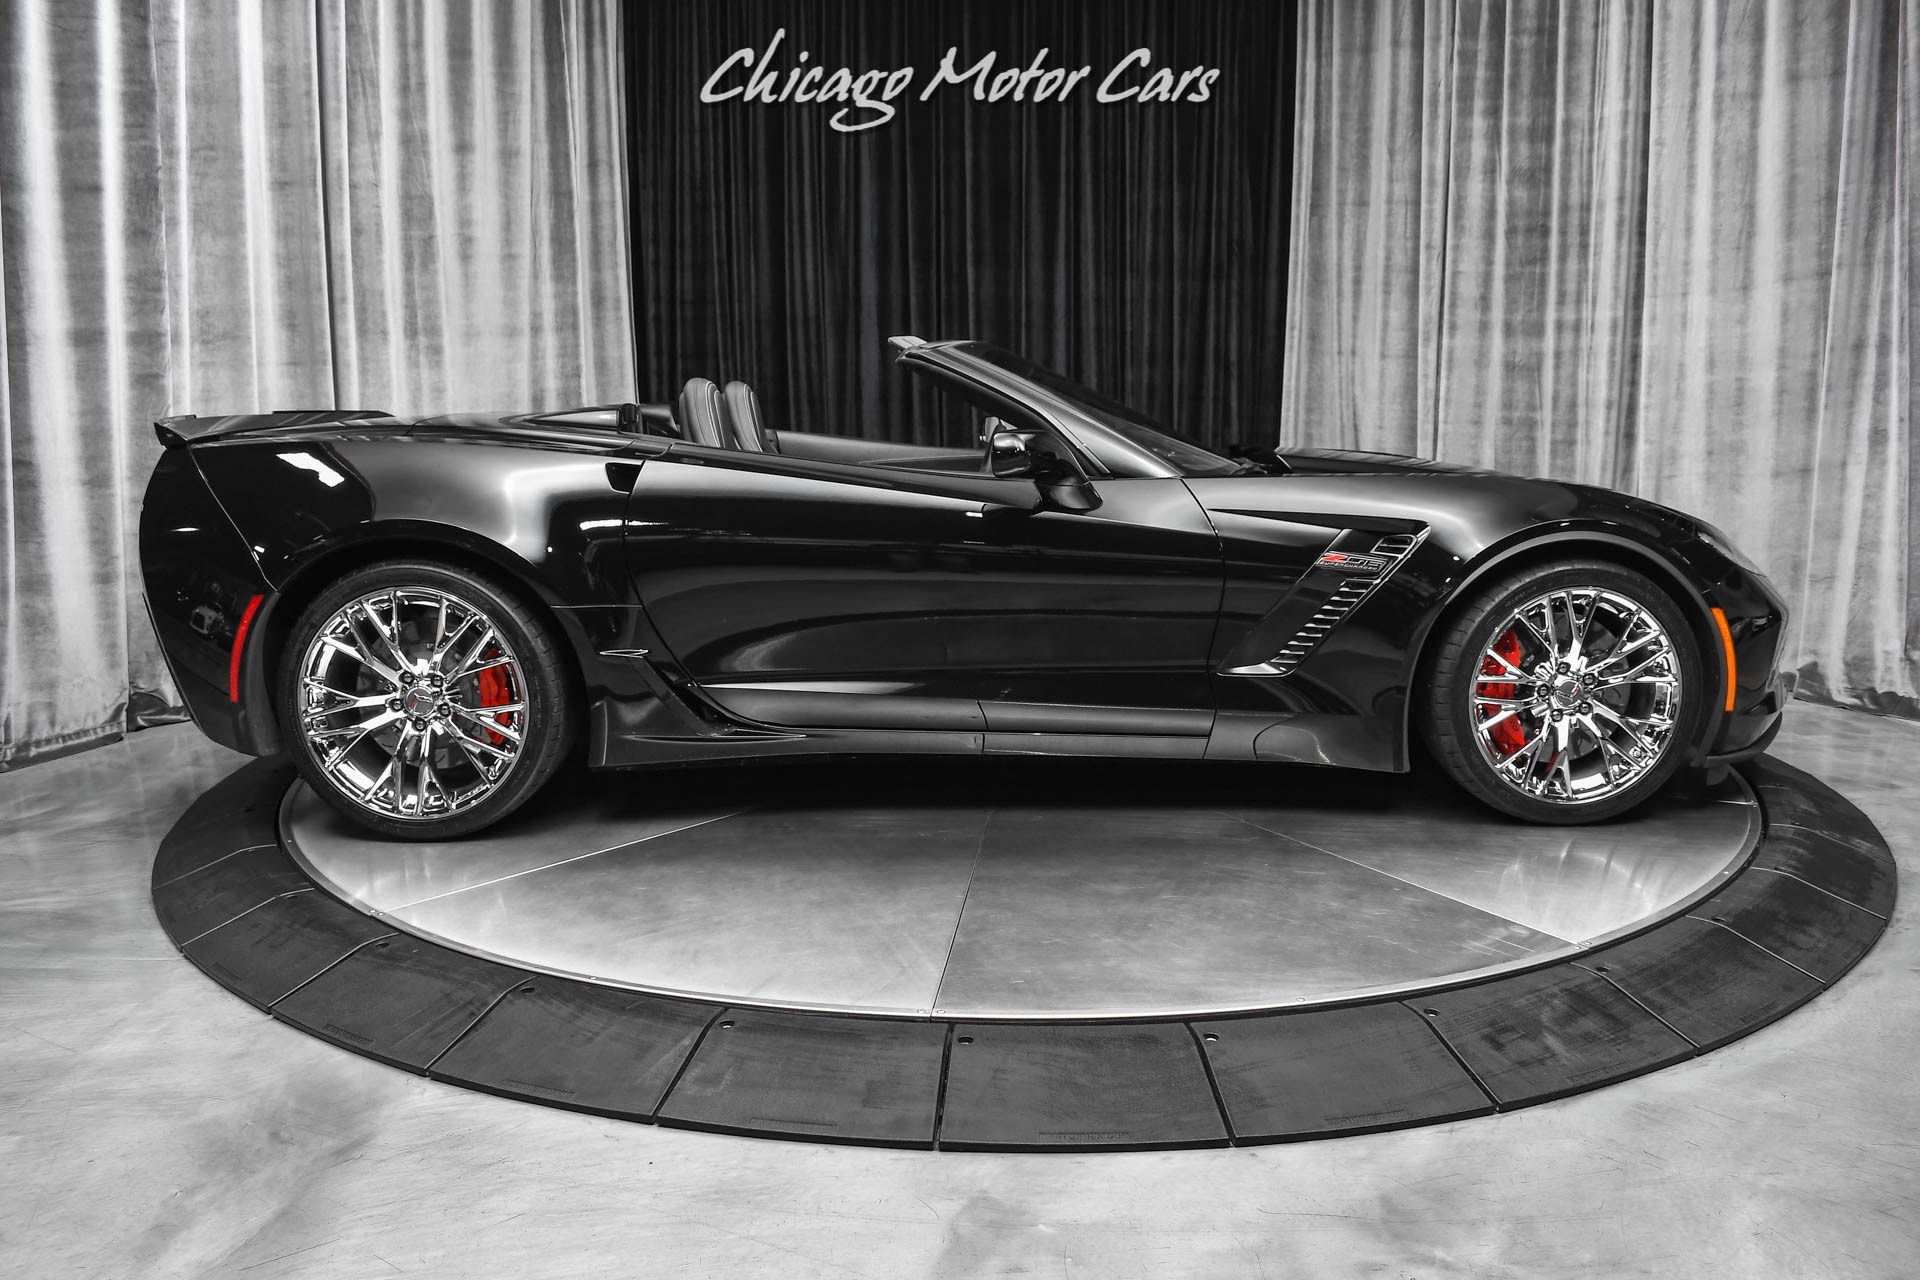 Used-2015-Chevrolet-Corvette-Z06-Convertible-3LZ-7-Speed-MANUAL-Polished-Wheels-11K-Miles